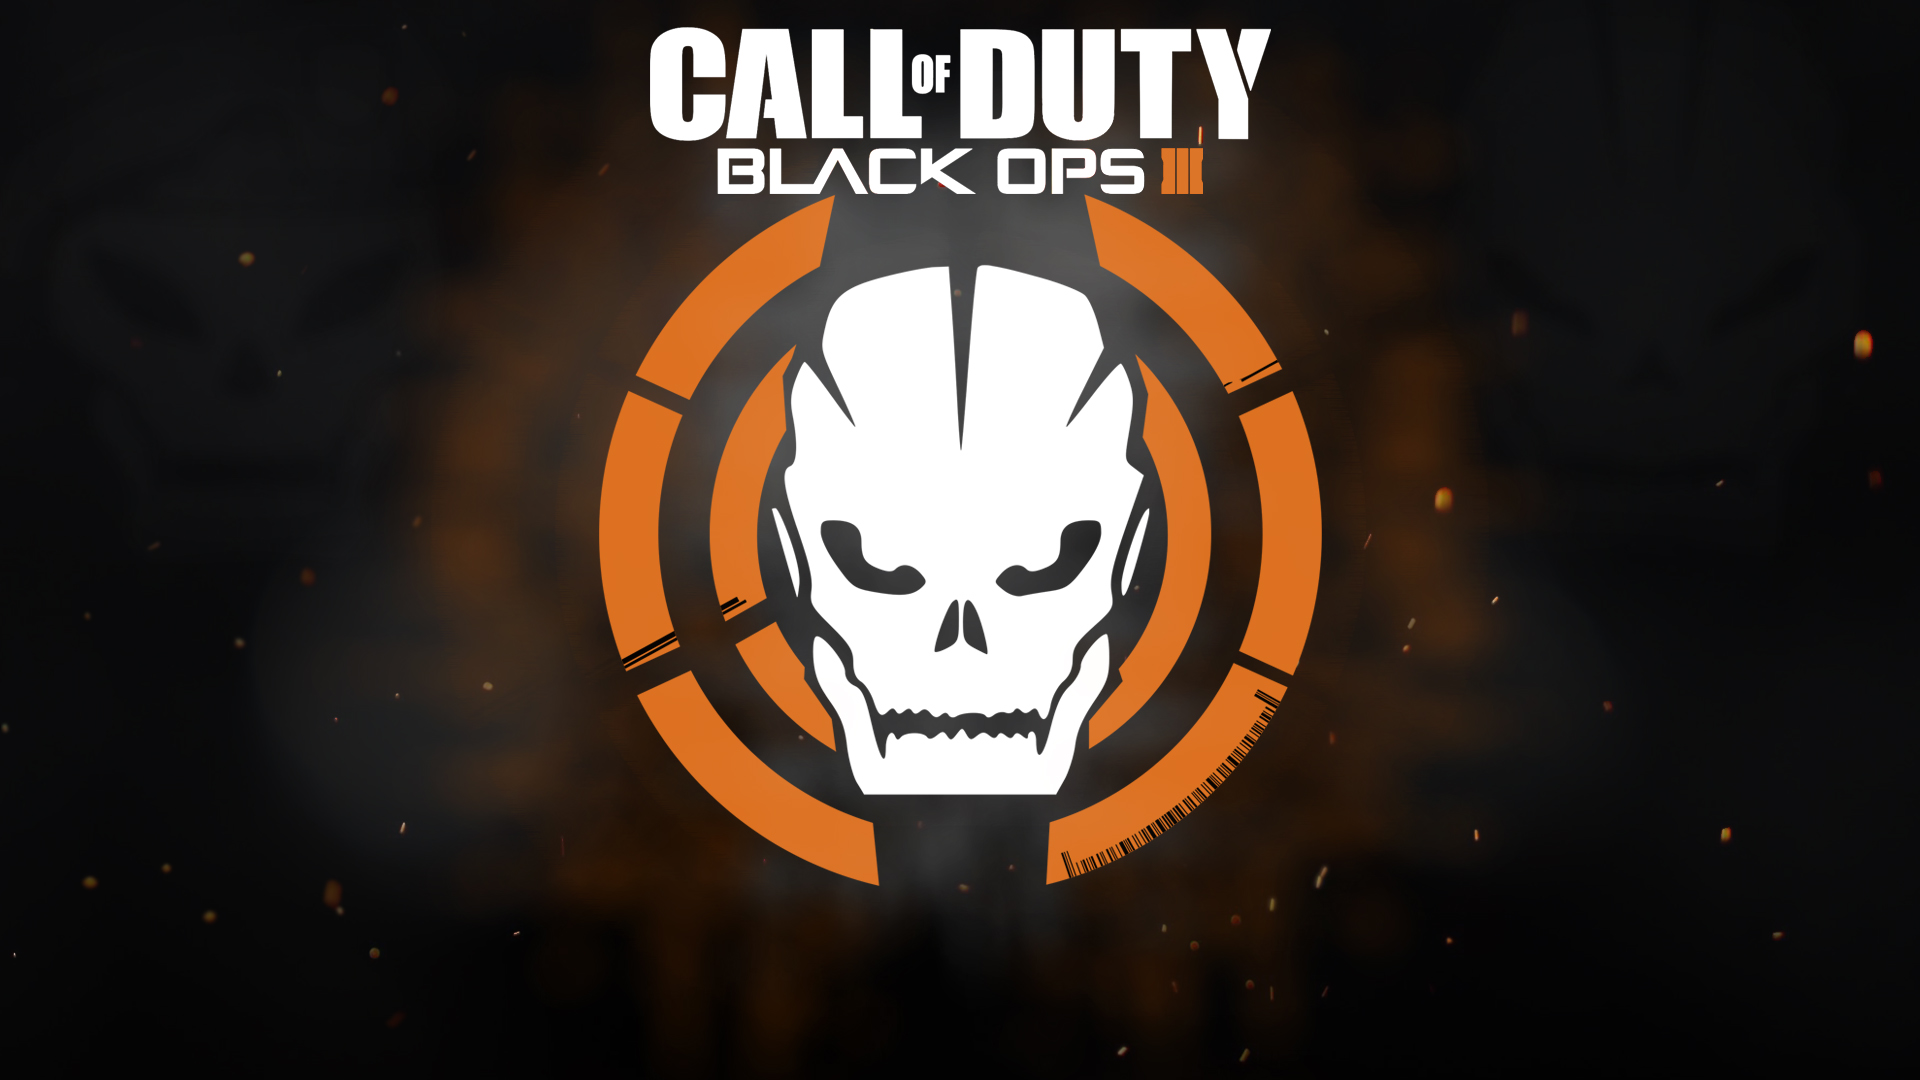 Call of Duty Black Ops 3 Wallpaper 02 by Toby Affenbude on